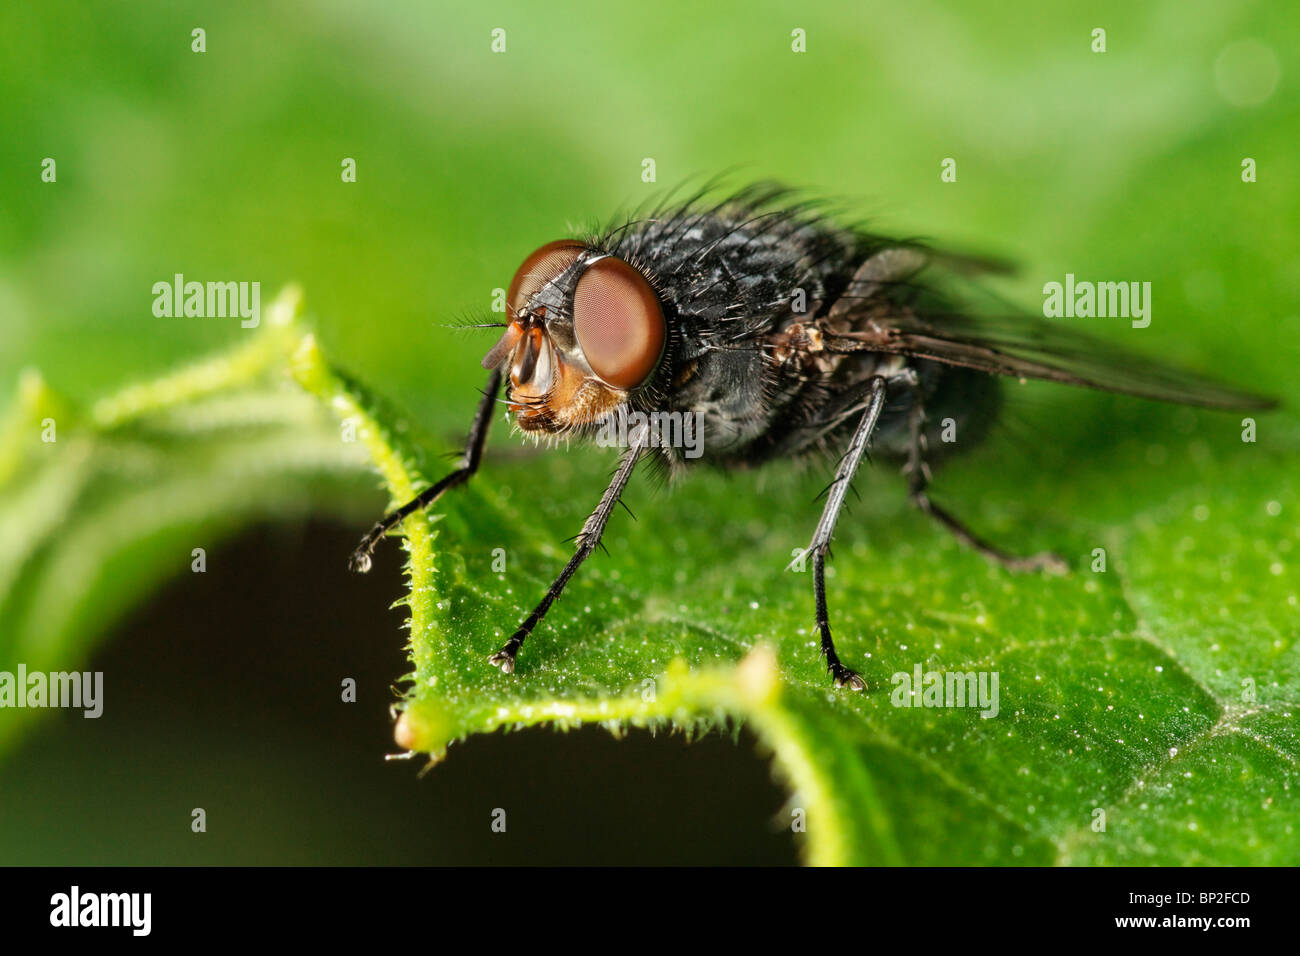 Fly standing on the edge of a leaf. Stock Photo